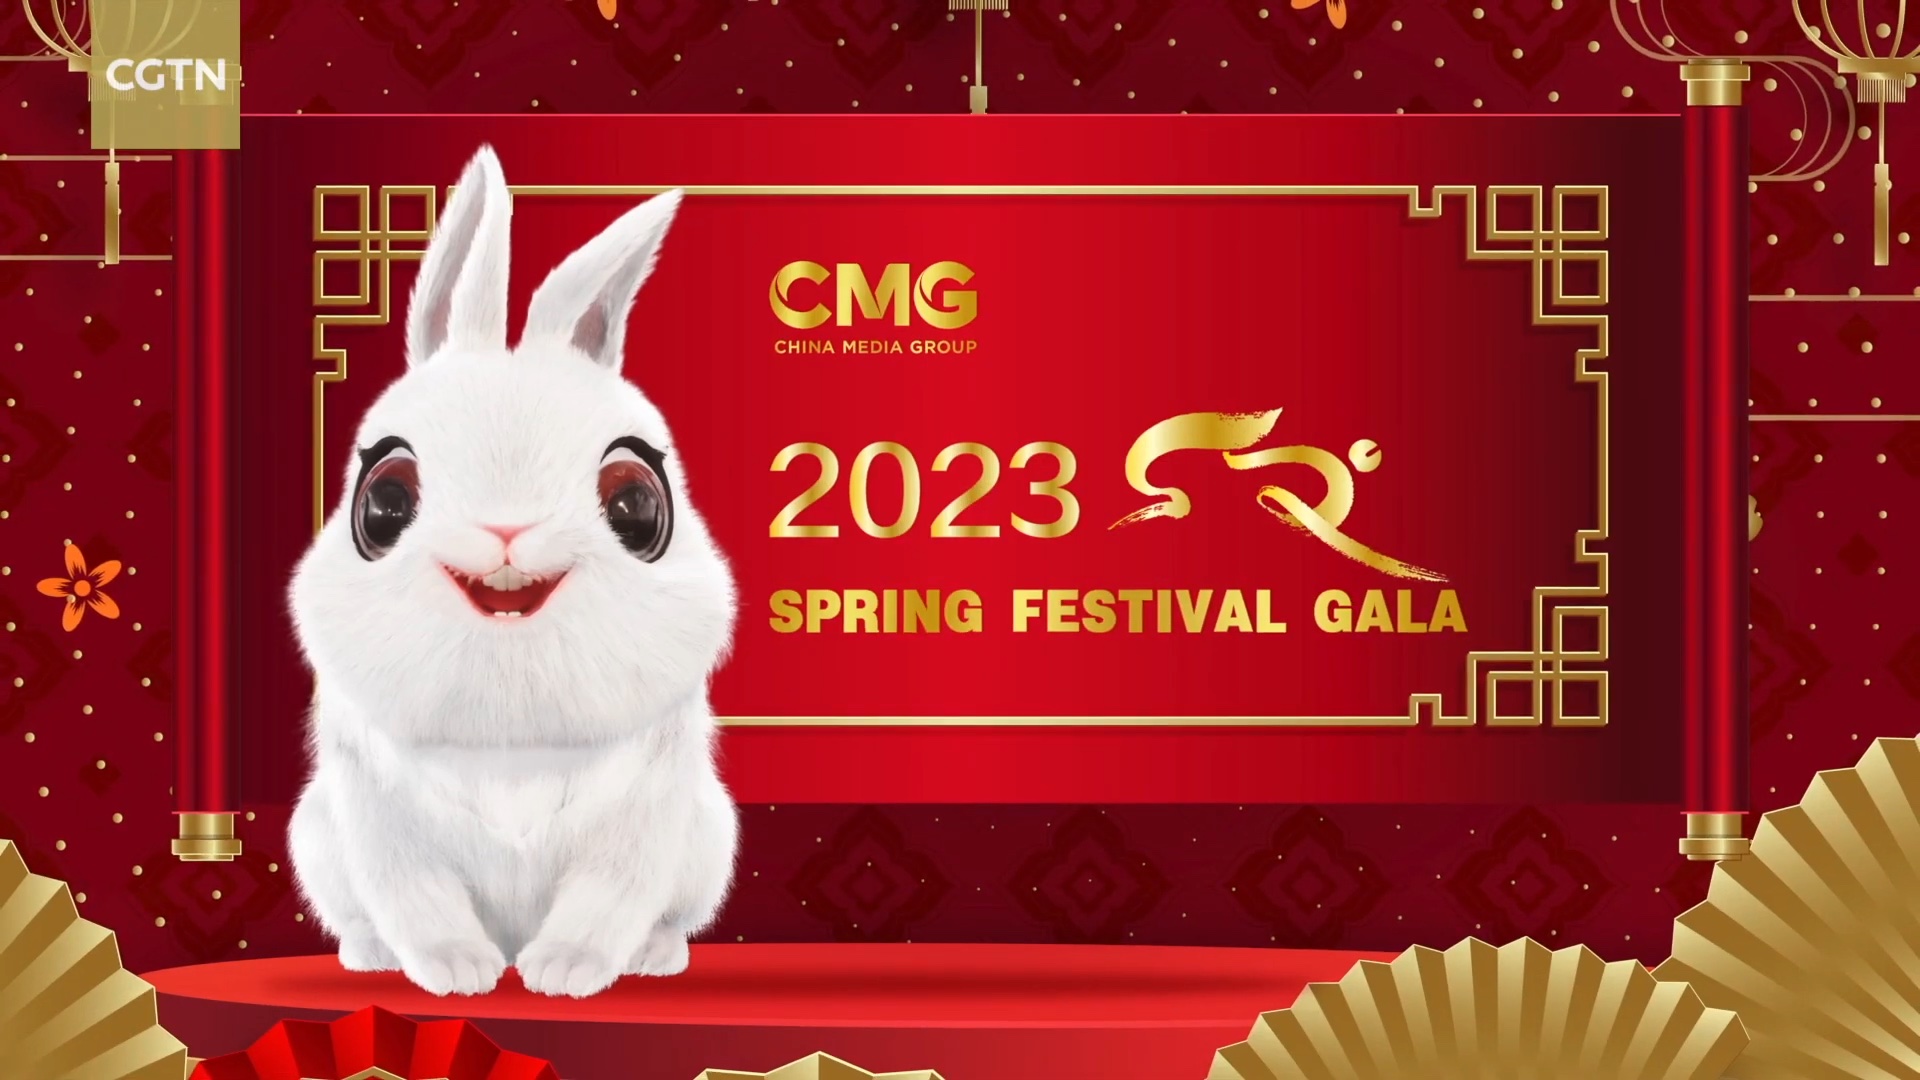 The 2023 CMG Spring Festival Gala is here! - CGTN